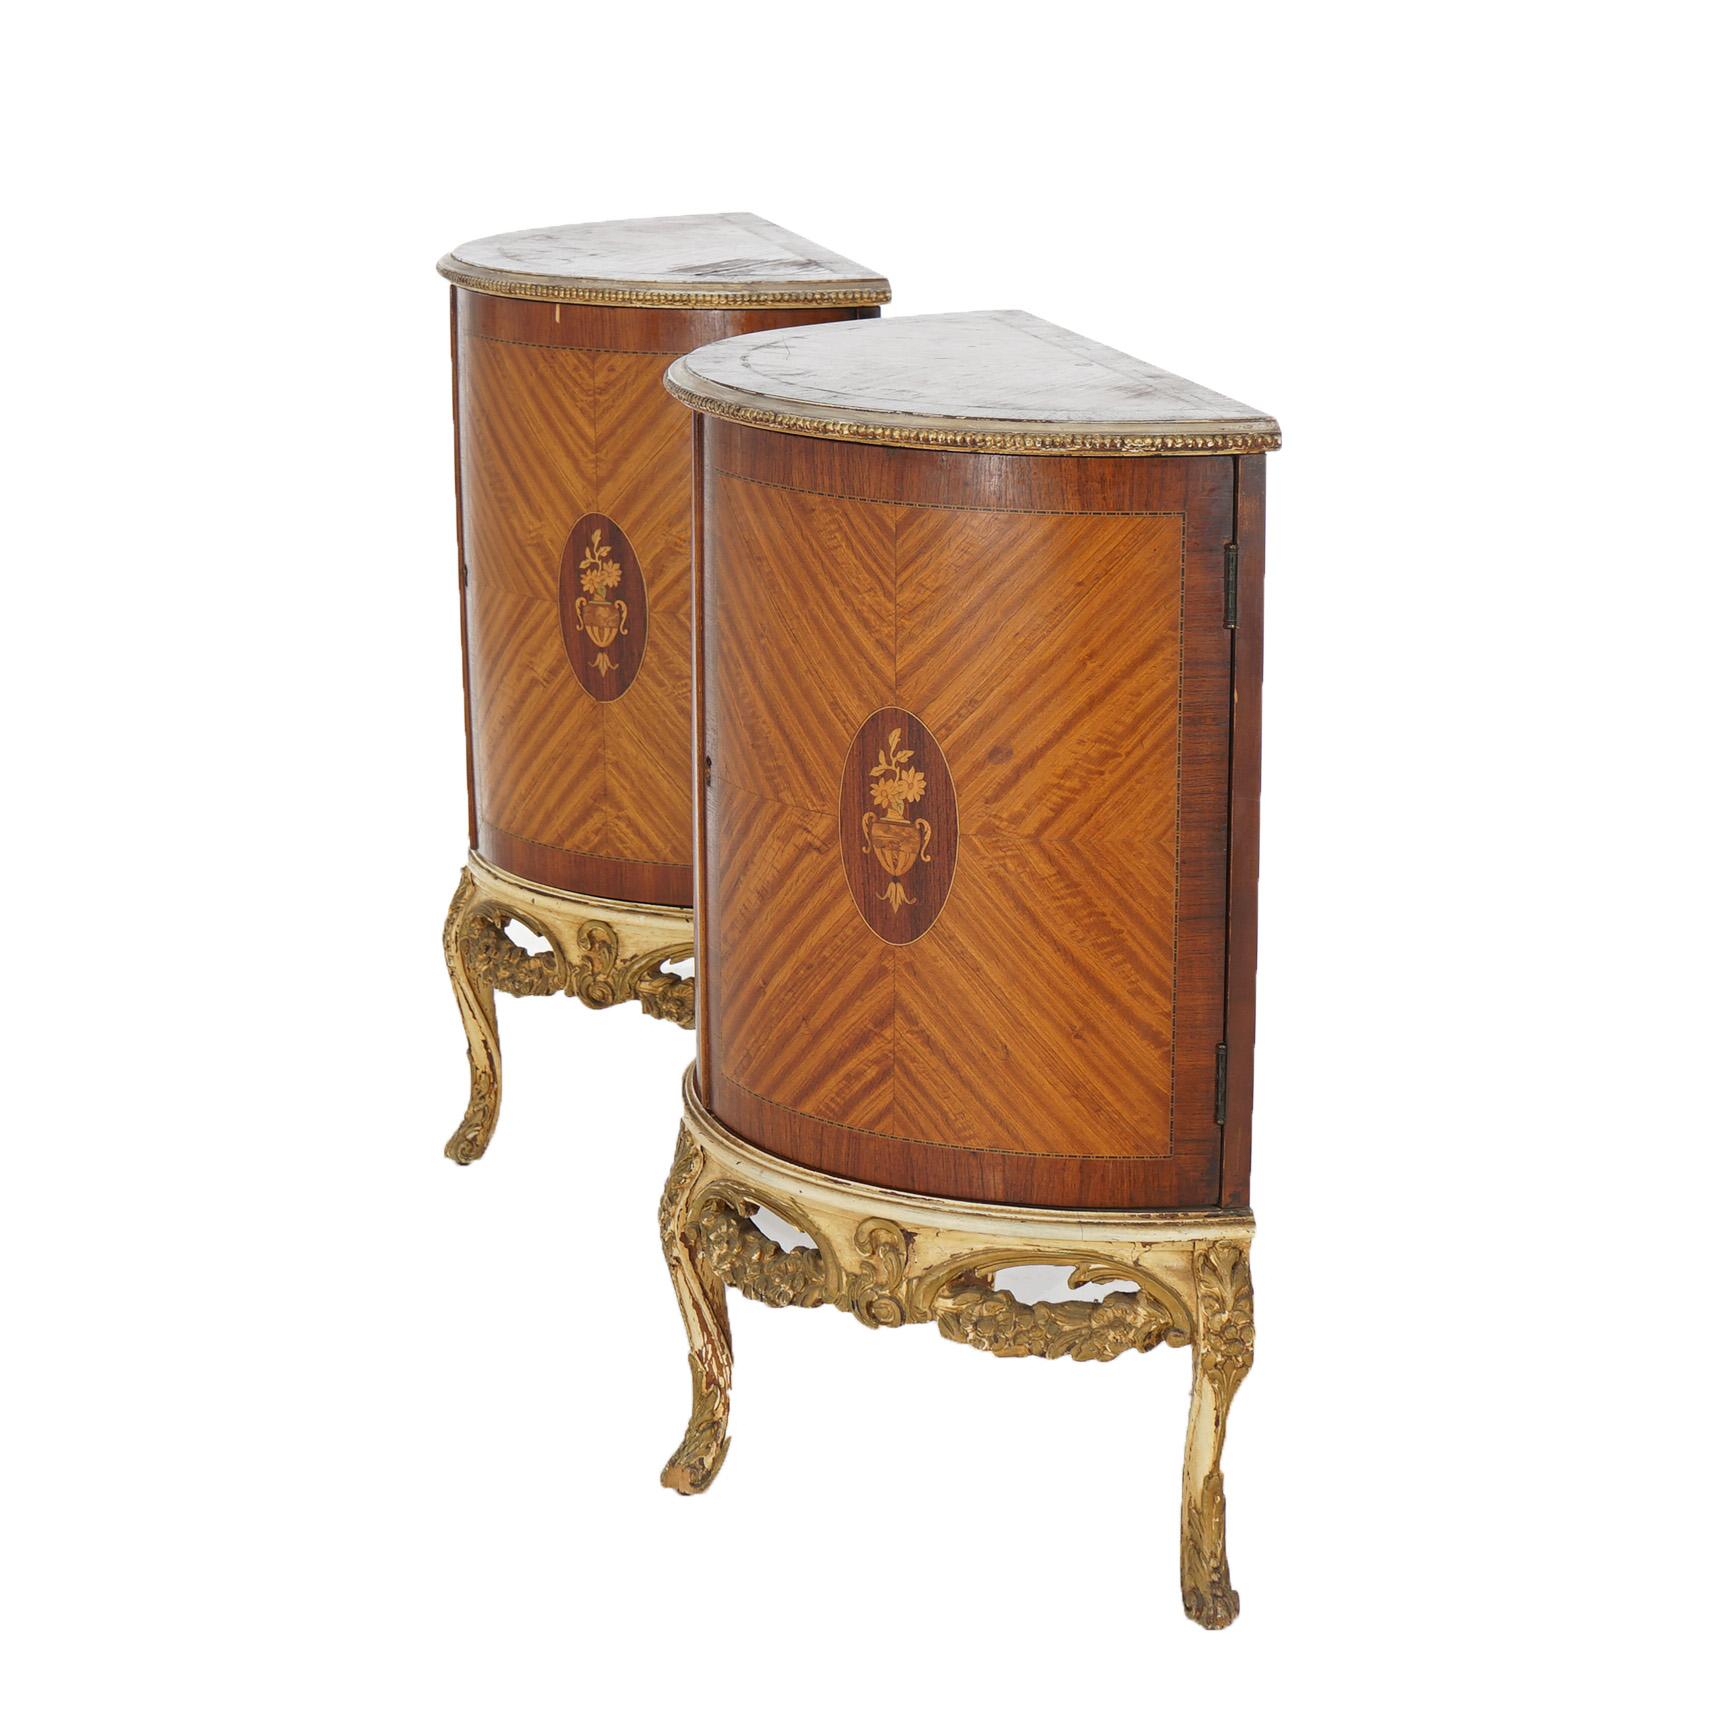 Two Antique Antique French Satinwood Inlaid Marquetry Demilune Side Tables C1920 For Sale 8